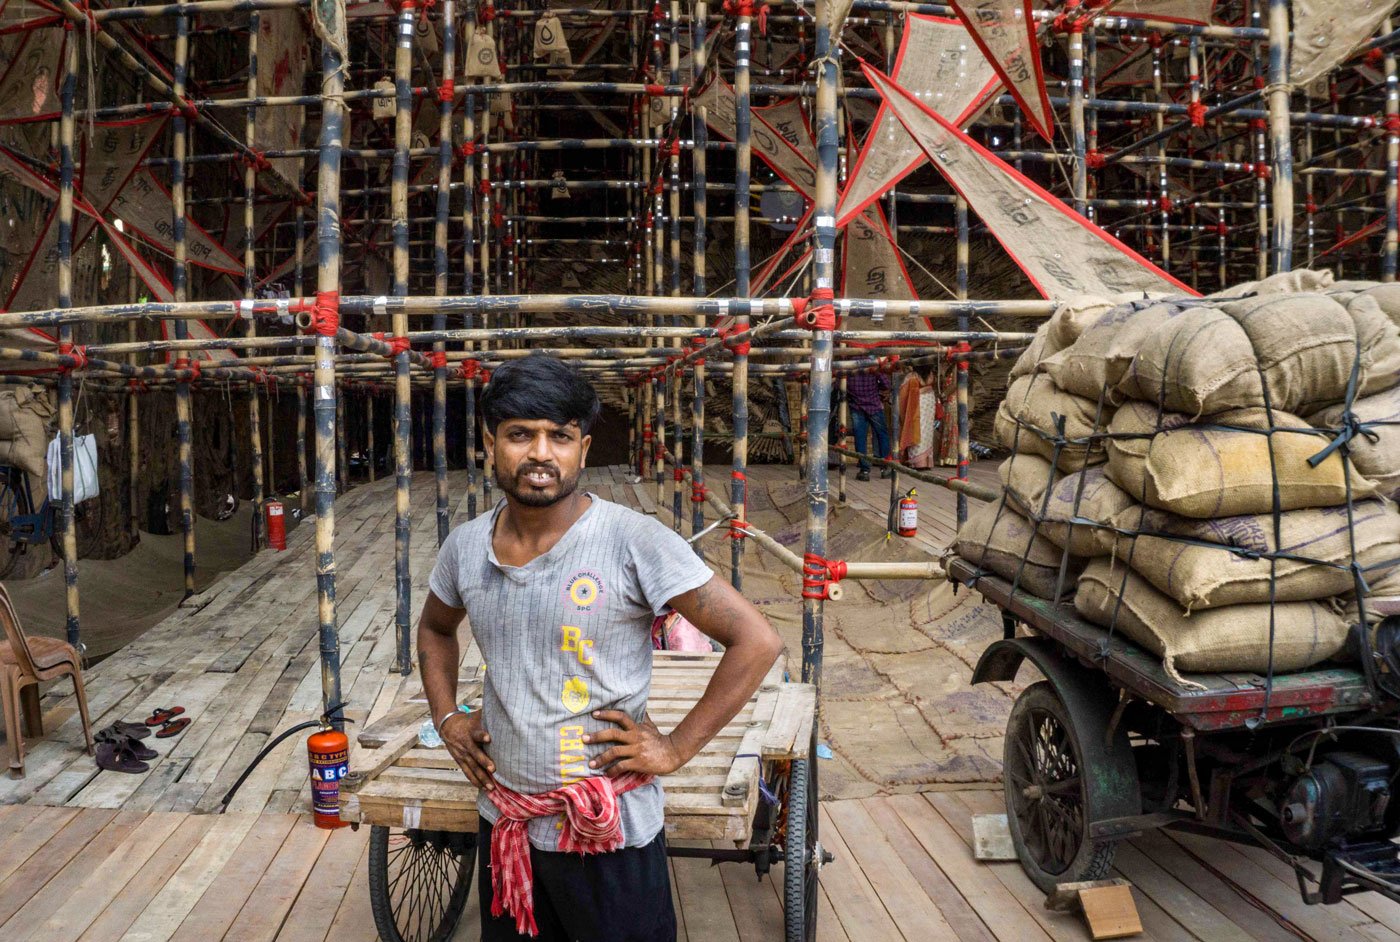 This worker in Behala said he identified with the Durga-as-migrant theme, finding it to be about people like himself